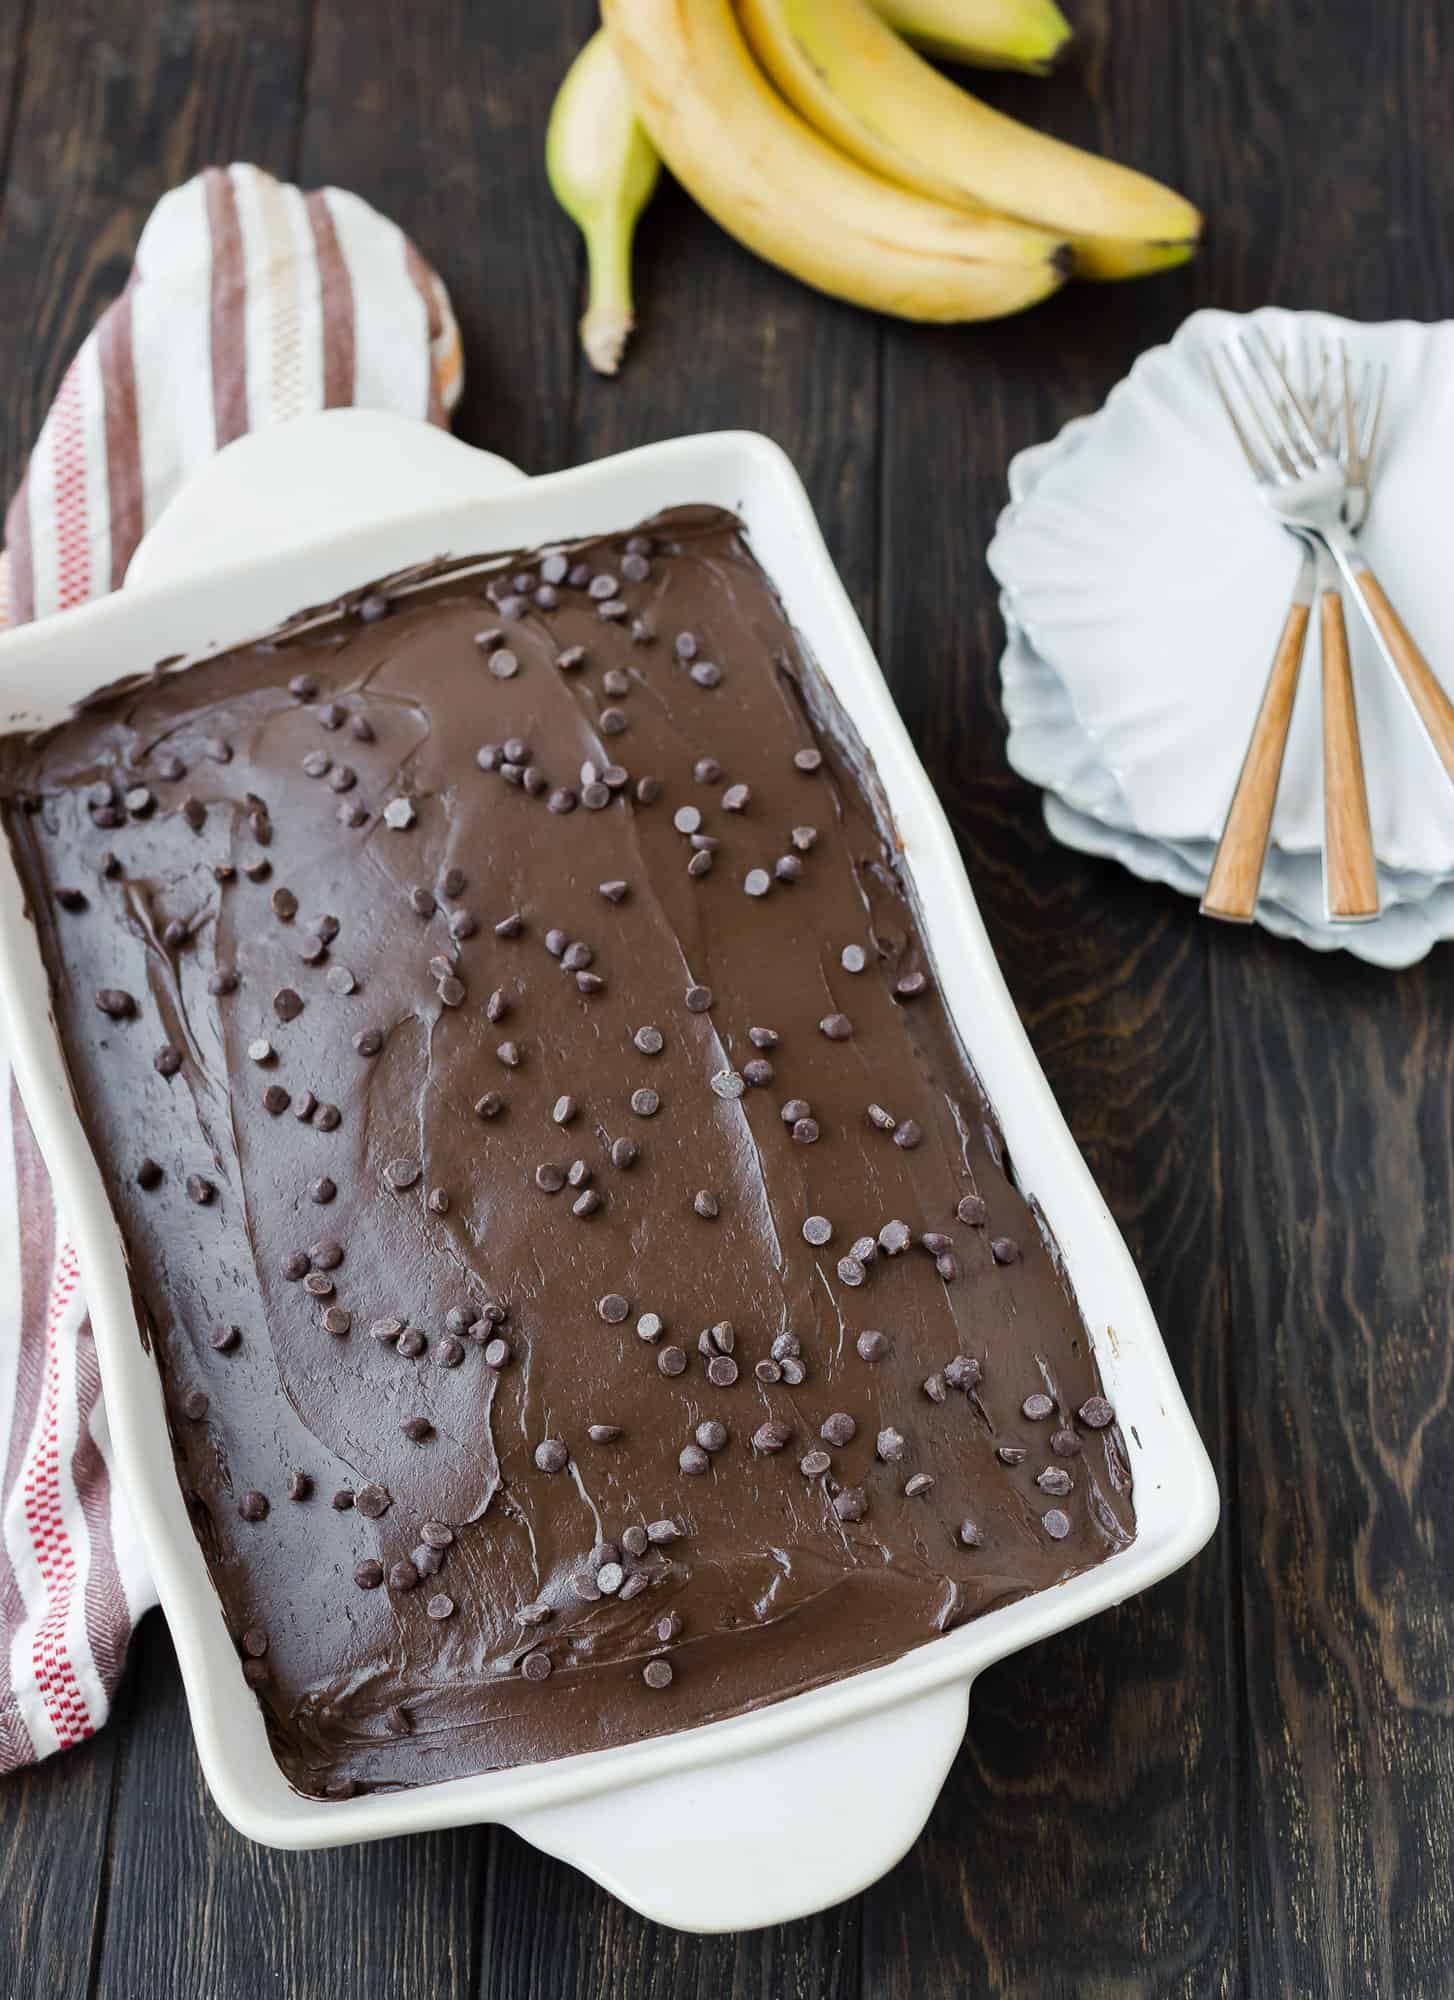 Cake with chocolate frosting in white pan.